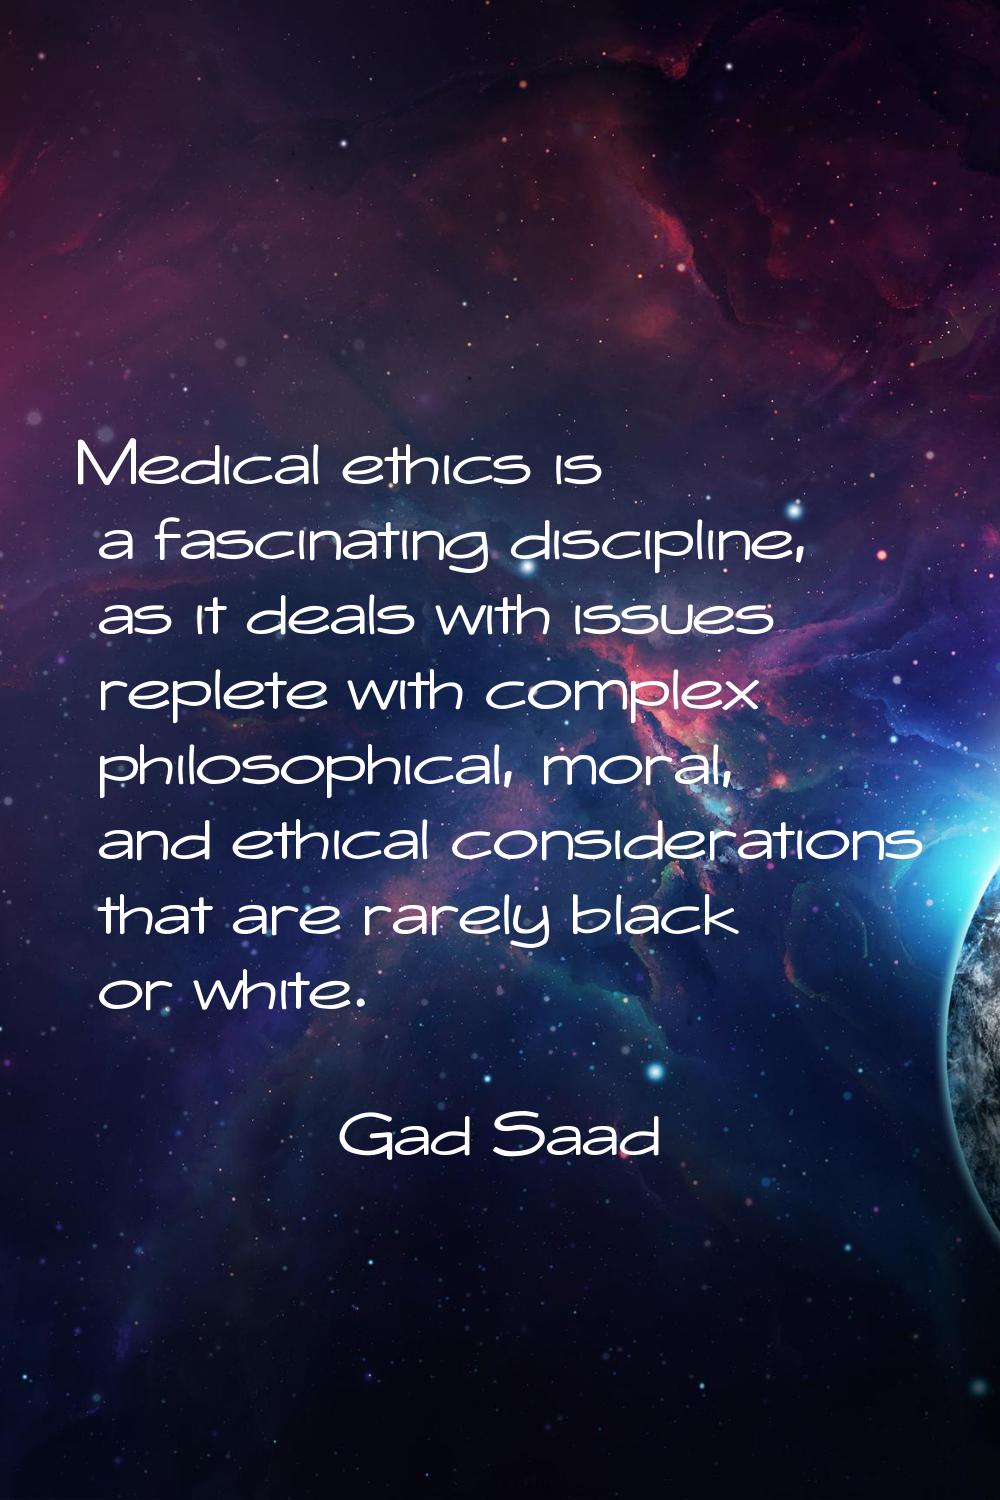 Medical ethics is a fascinating discipline, as it deals with issues replete with complex philosophi